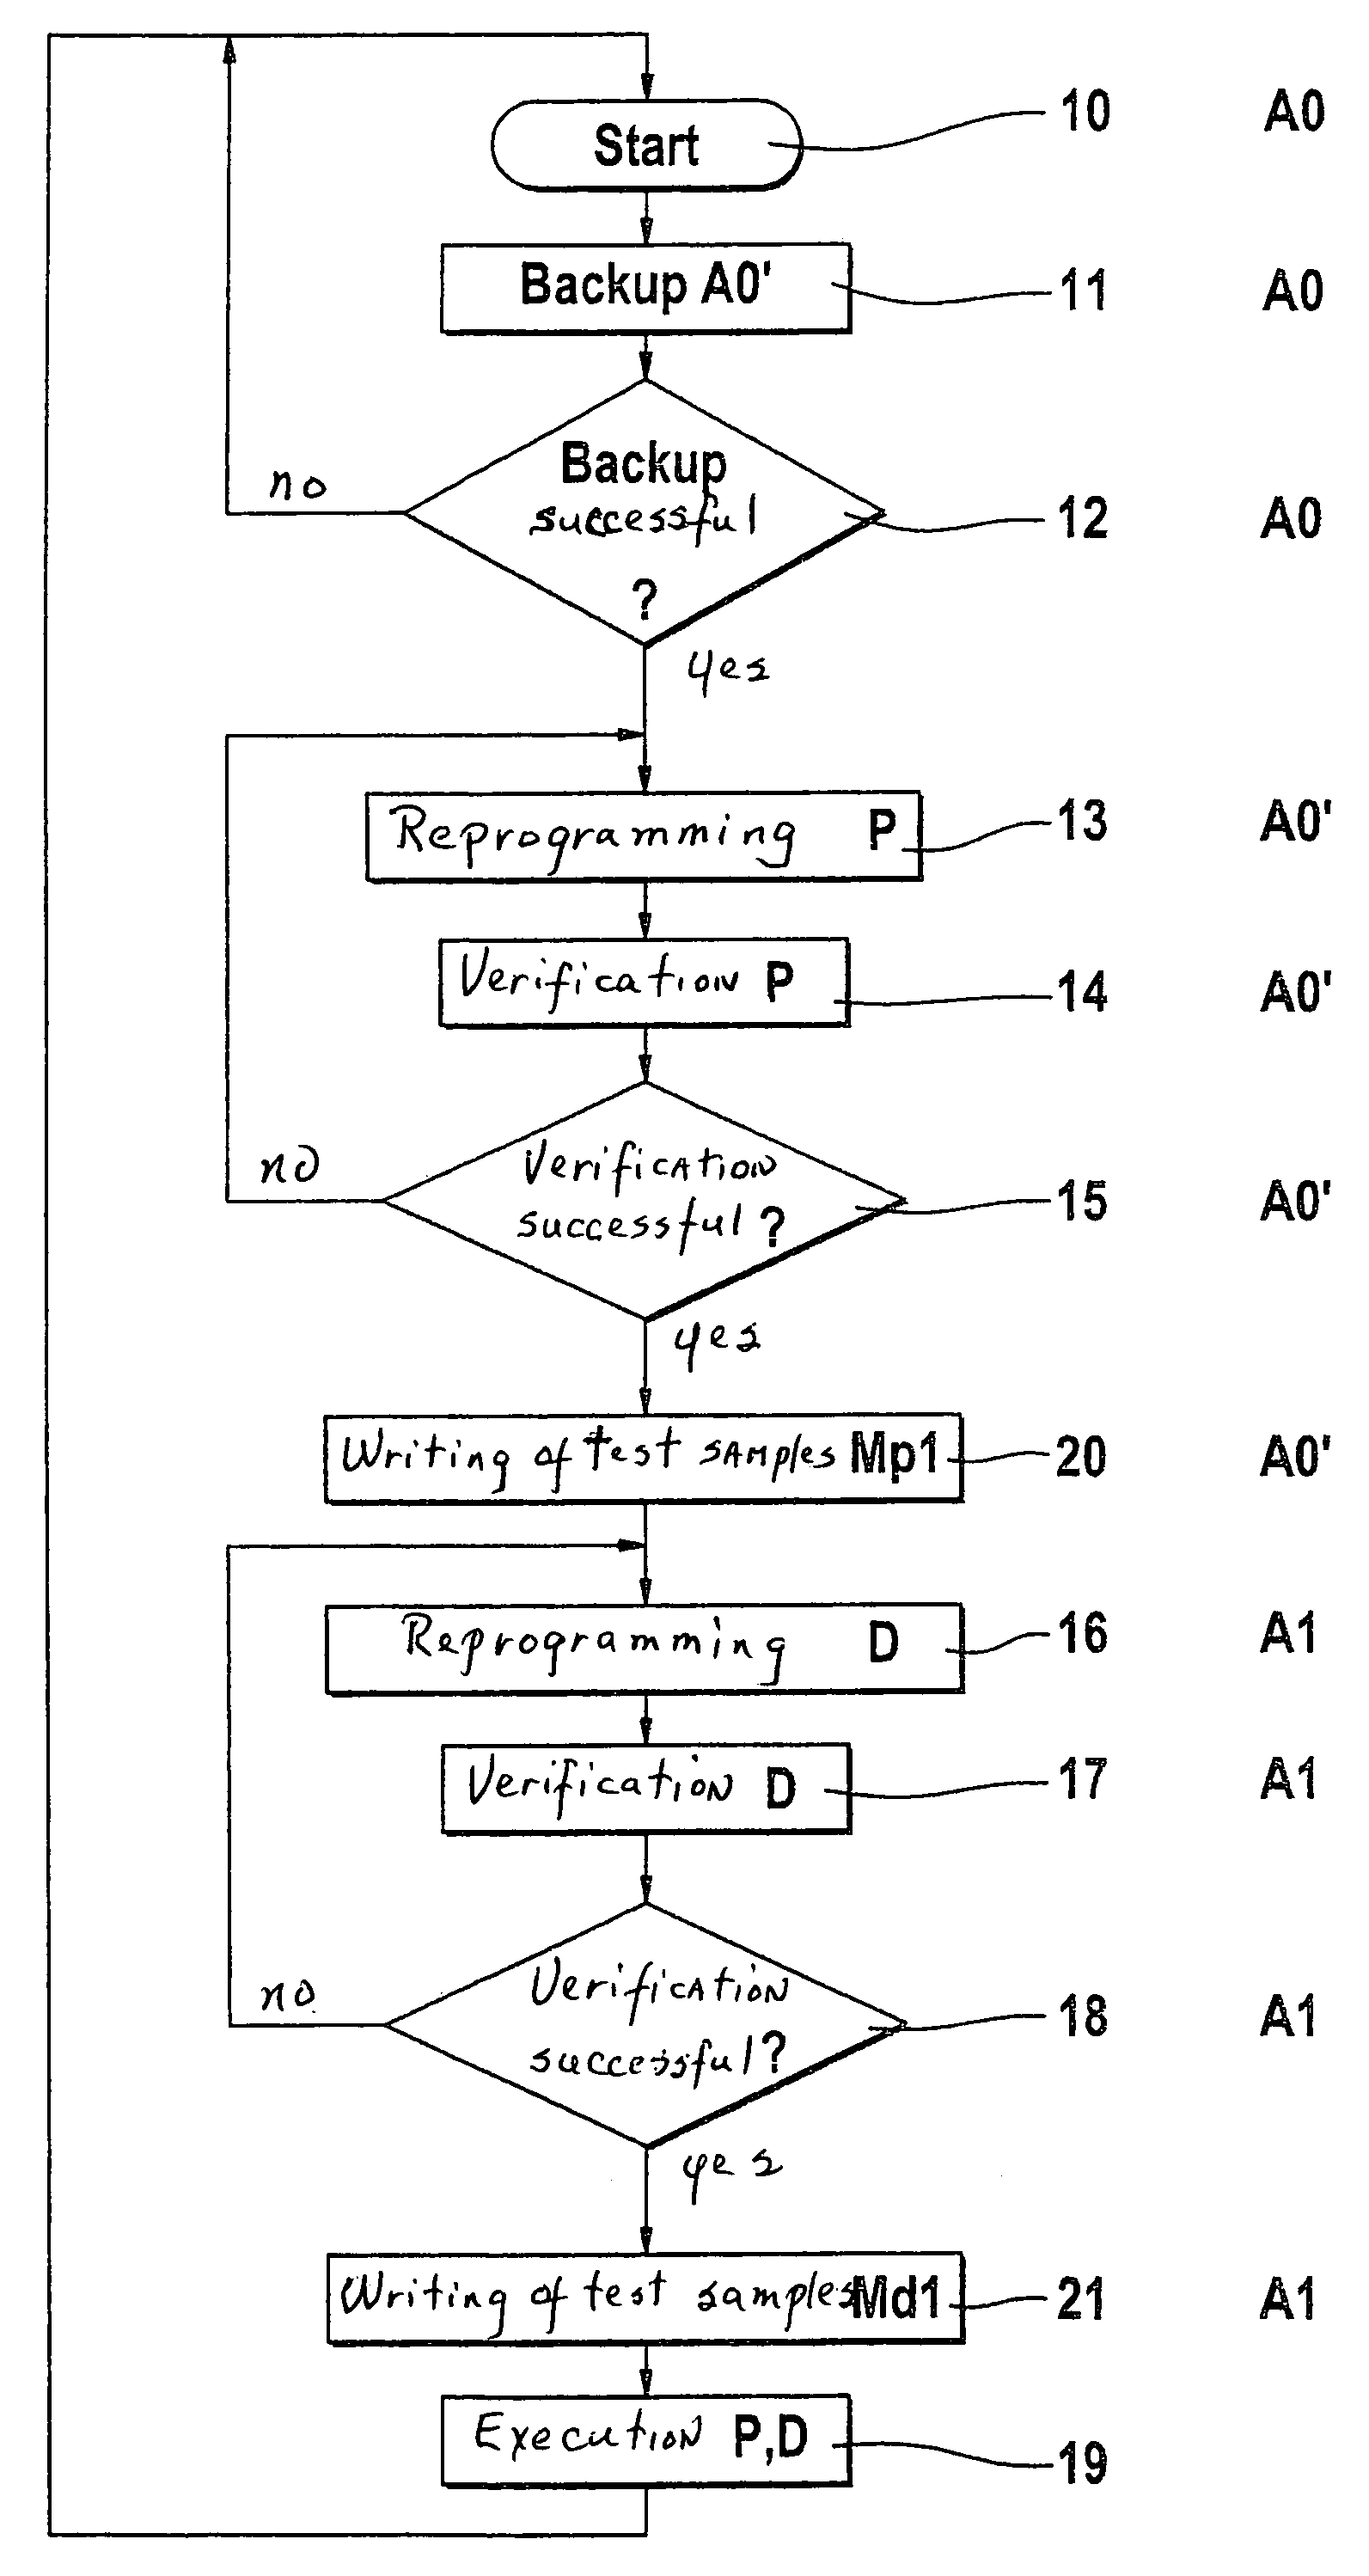 Method for operating a control device